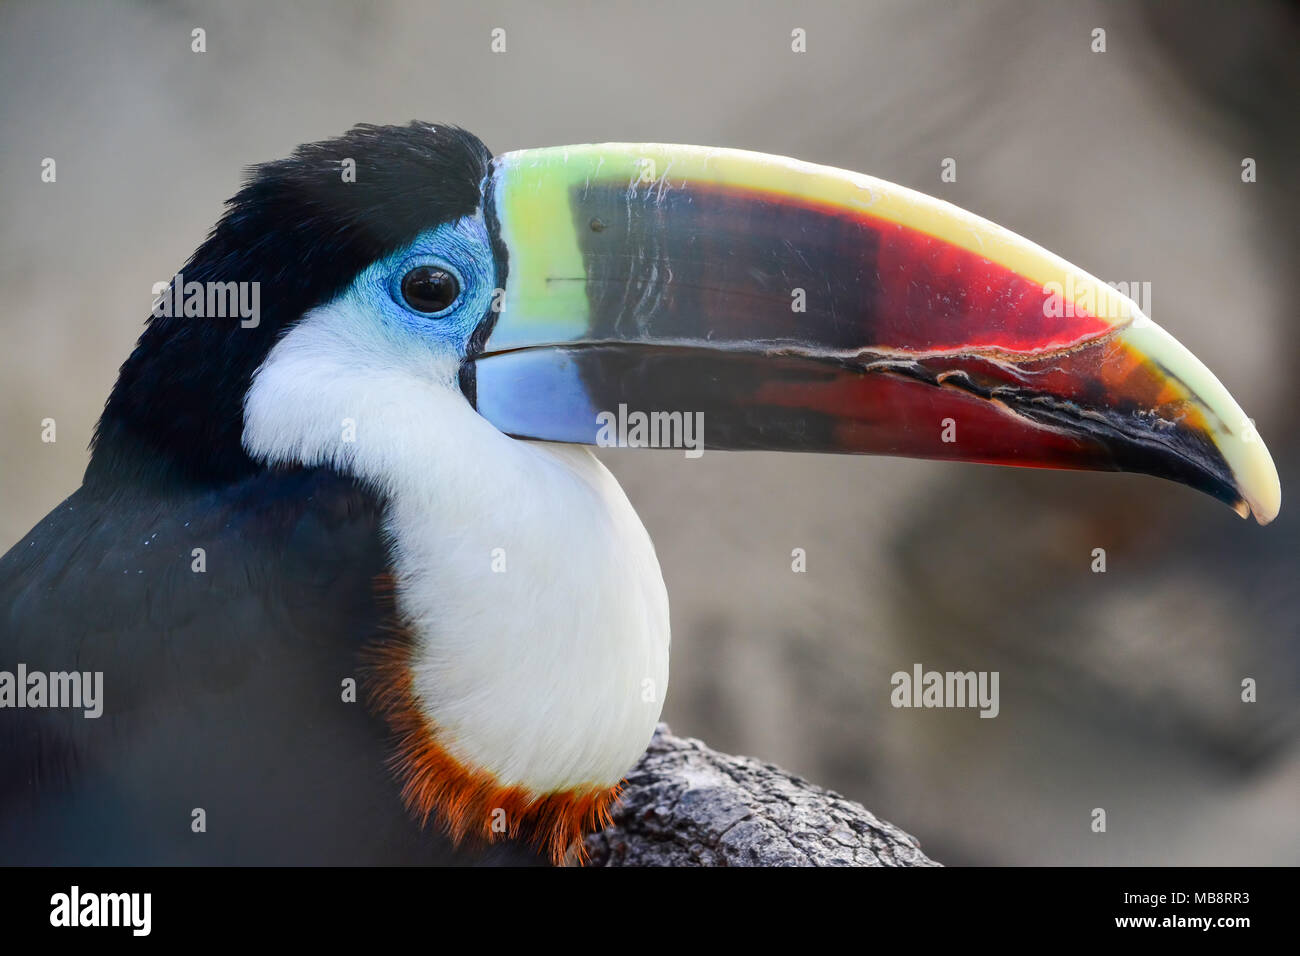 Tropical toucan bird against gray blured background, portrait, close up view Stock Photo